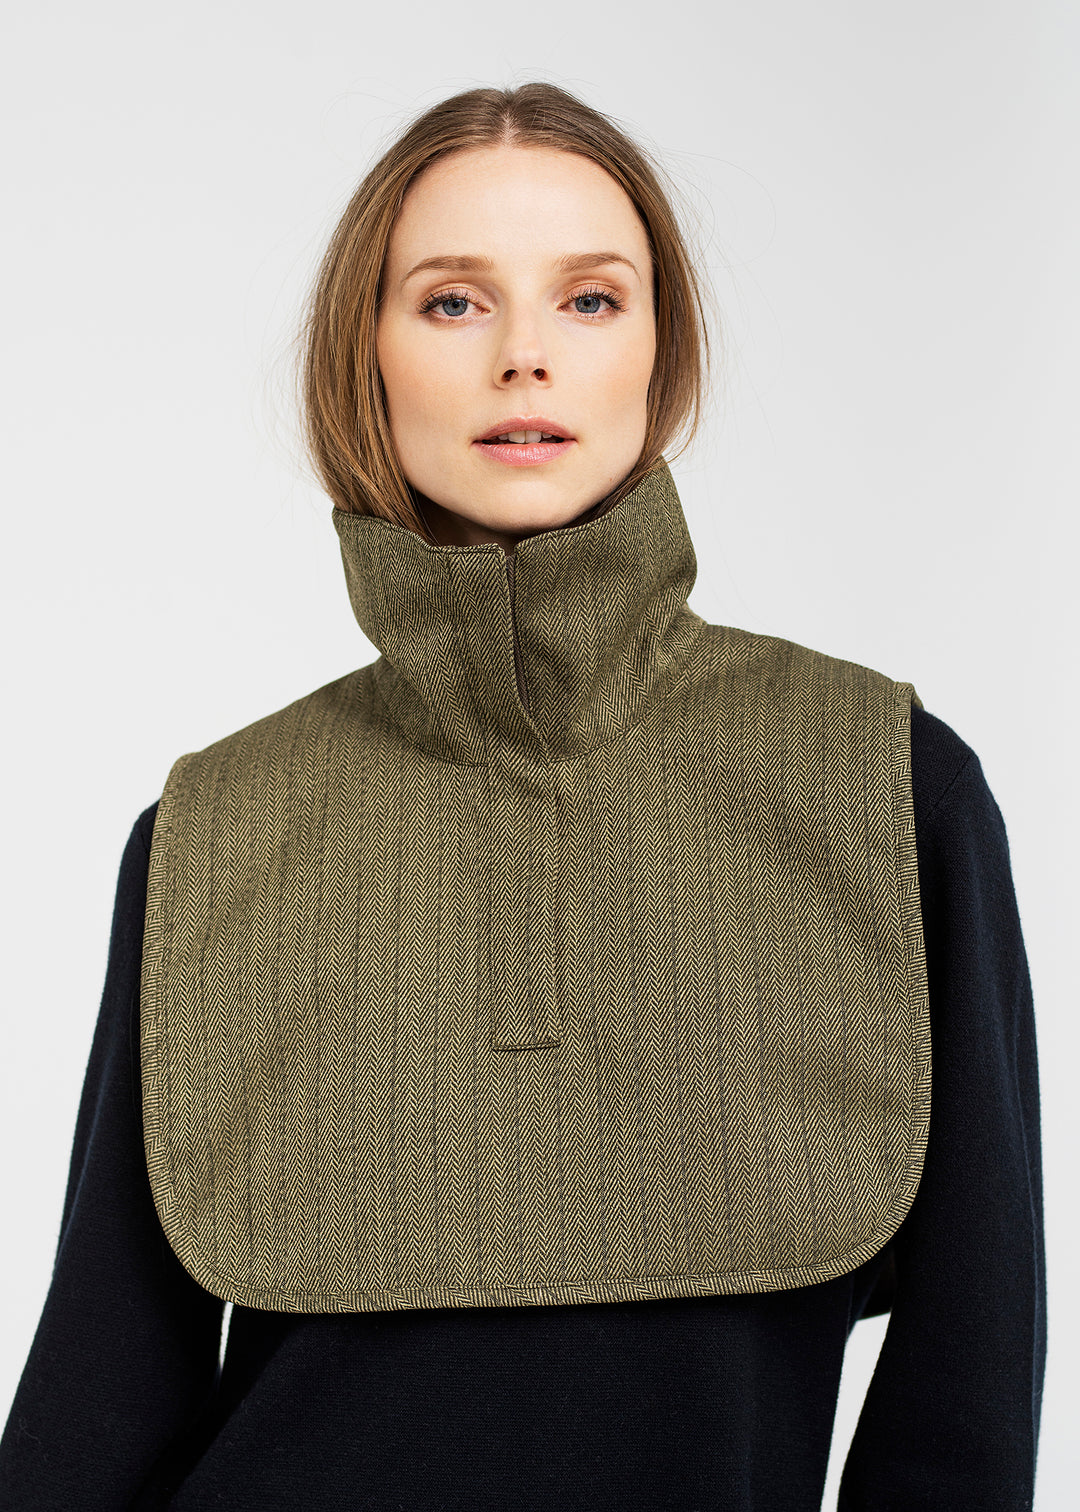 BRGN by Lunde & Gaundal Neck warmer Accessories 860 Green Tweed